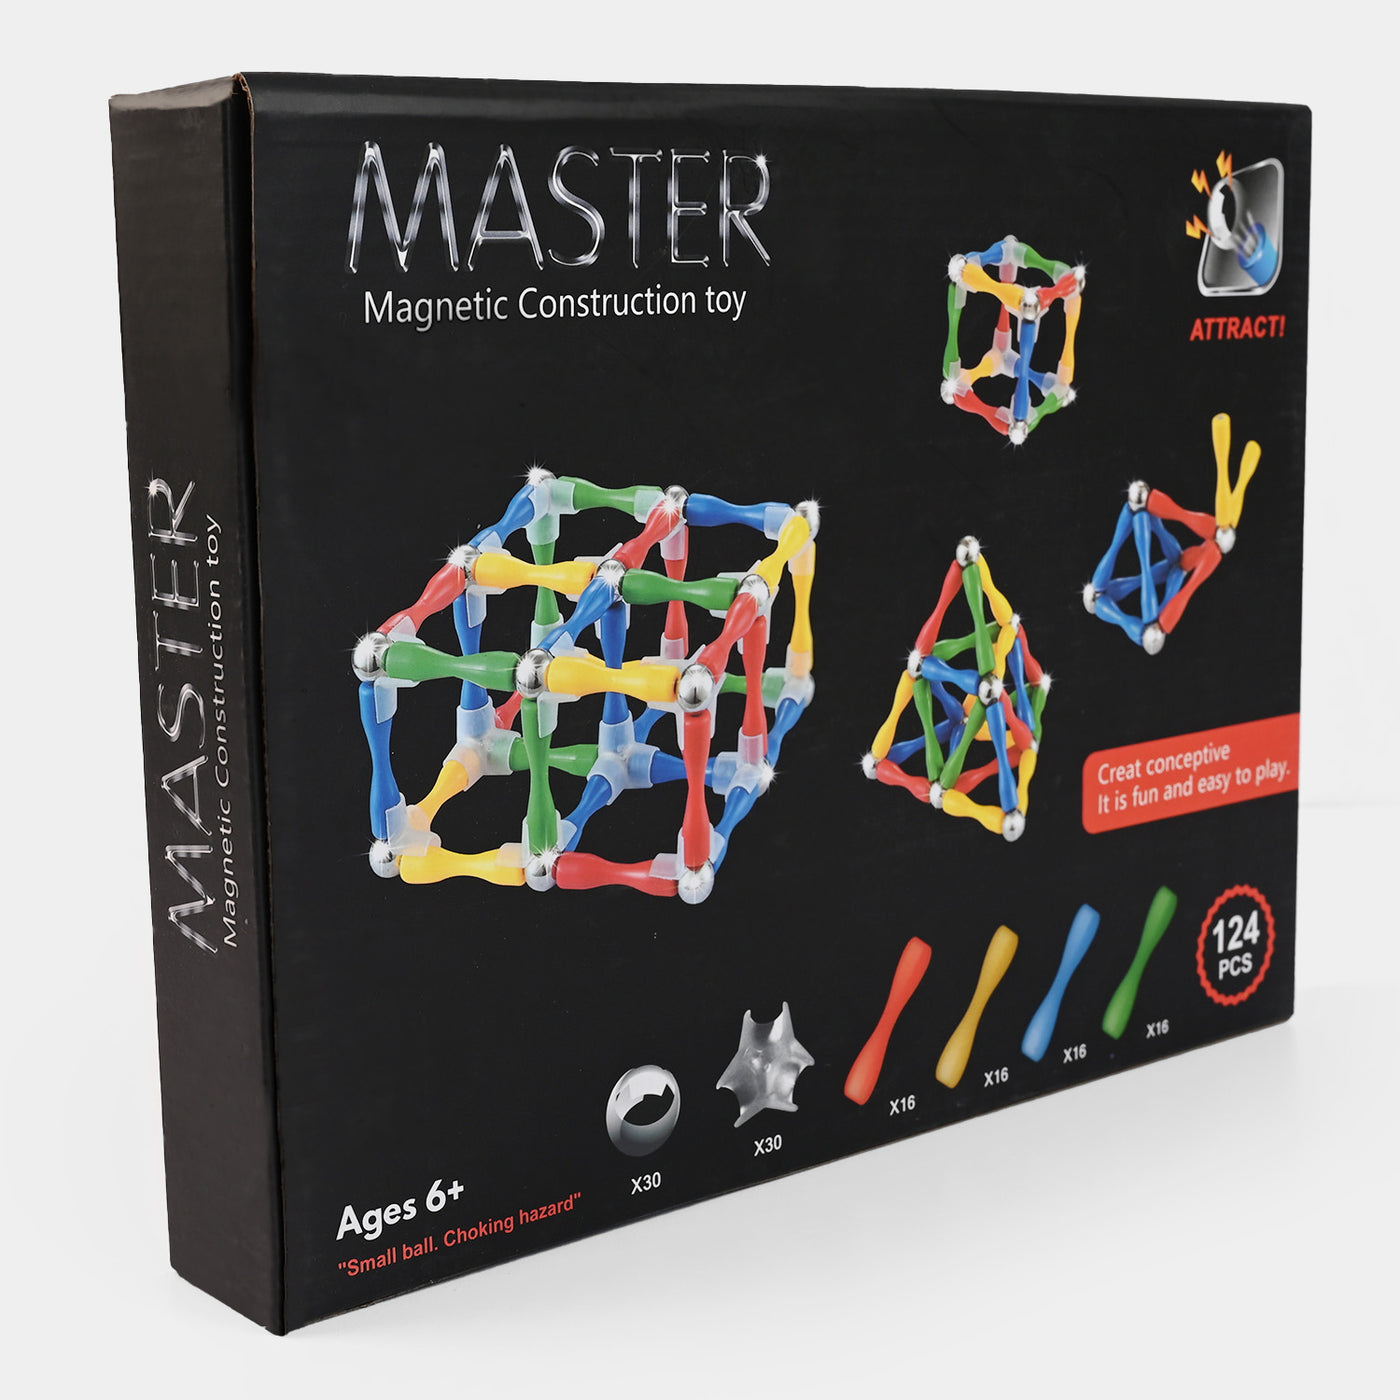 Master Magnetic Construction Toy - 124 PCs